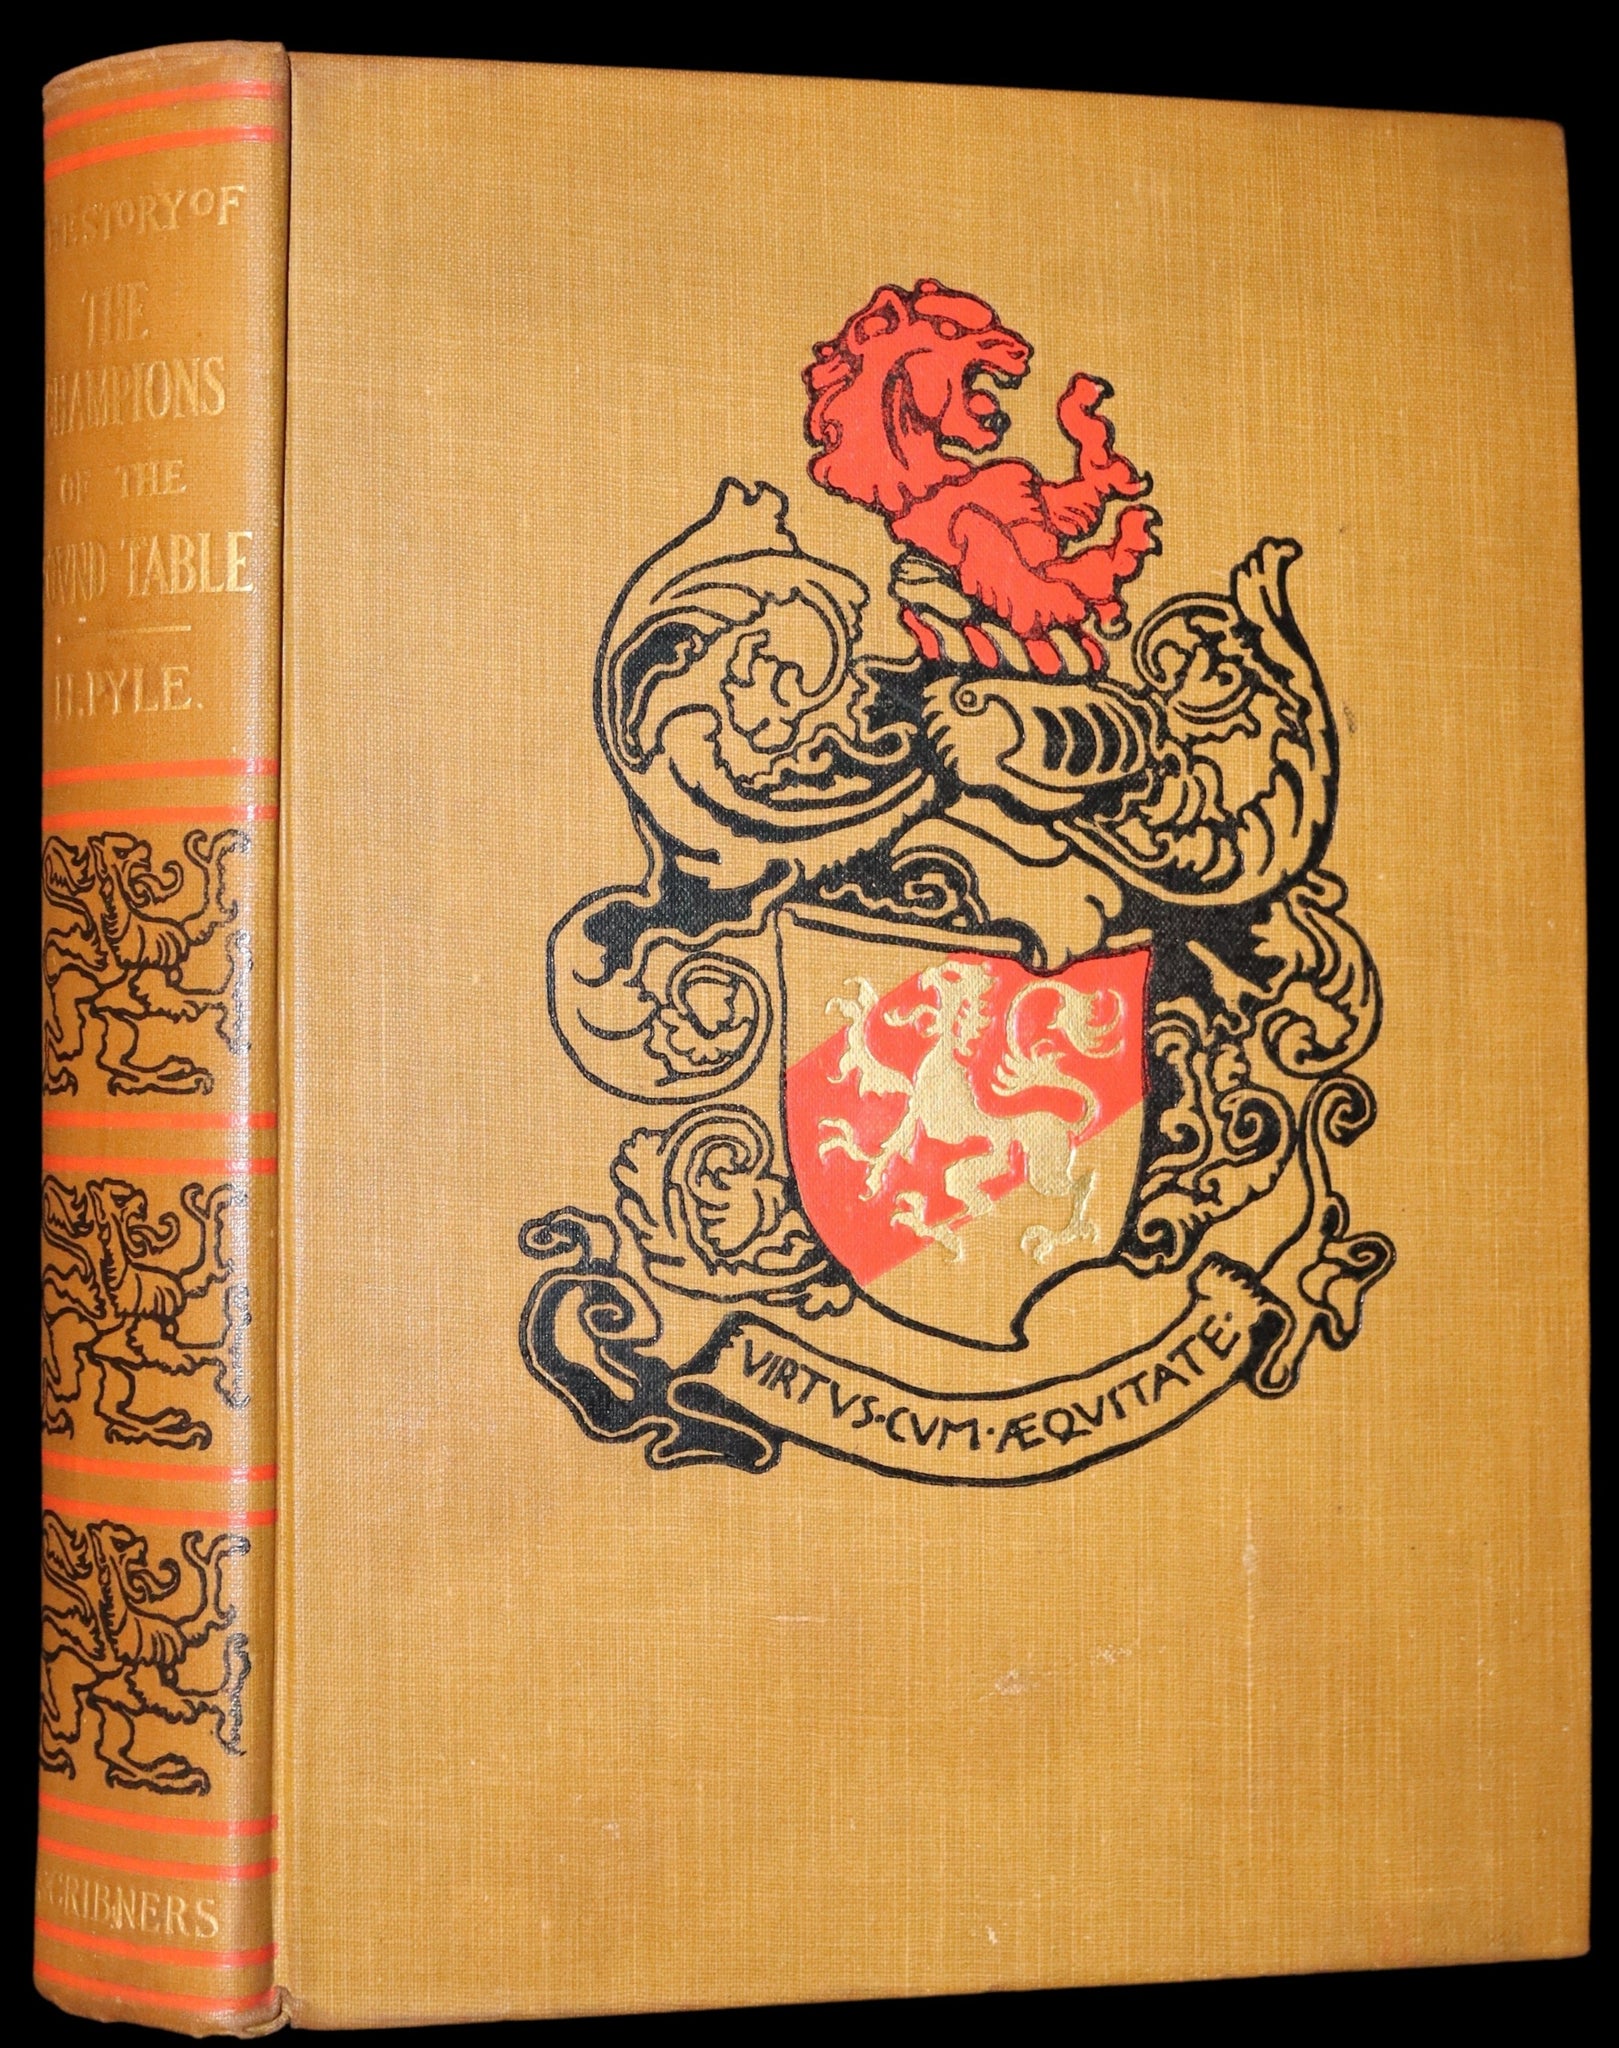 1905 Rare First Edition - King Arthur Tales, THE STORY OF THE CHAMPIONS OF THE ROUND TABLE by Howard Pyle.